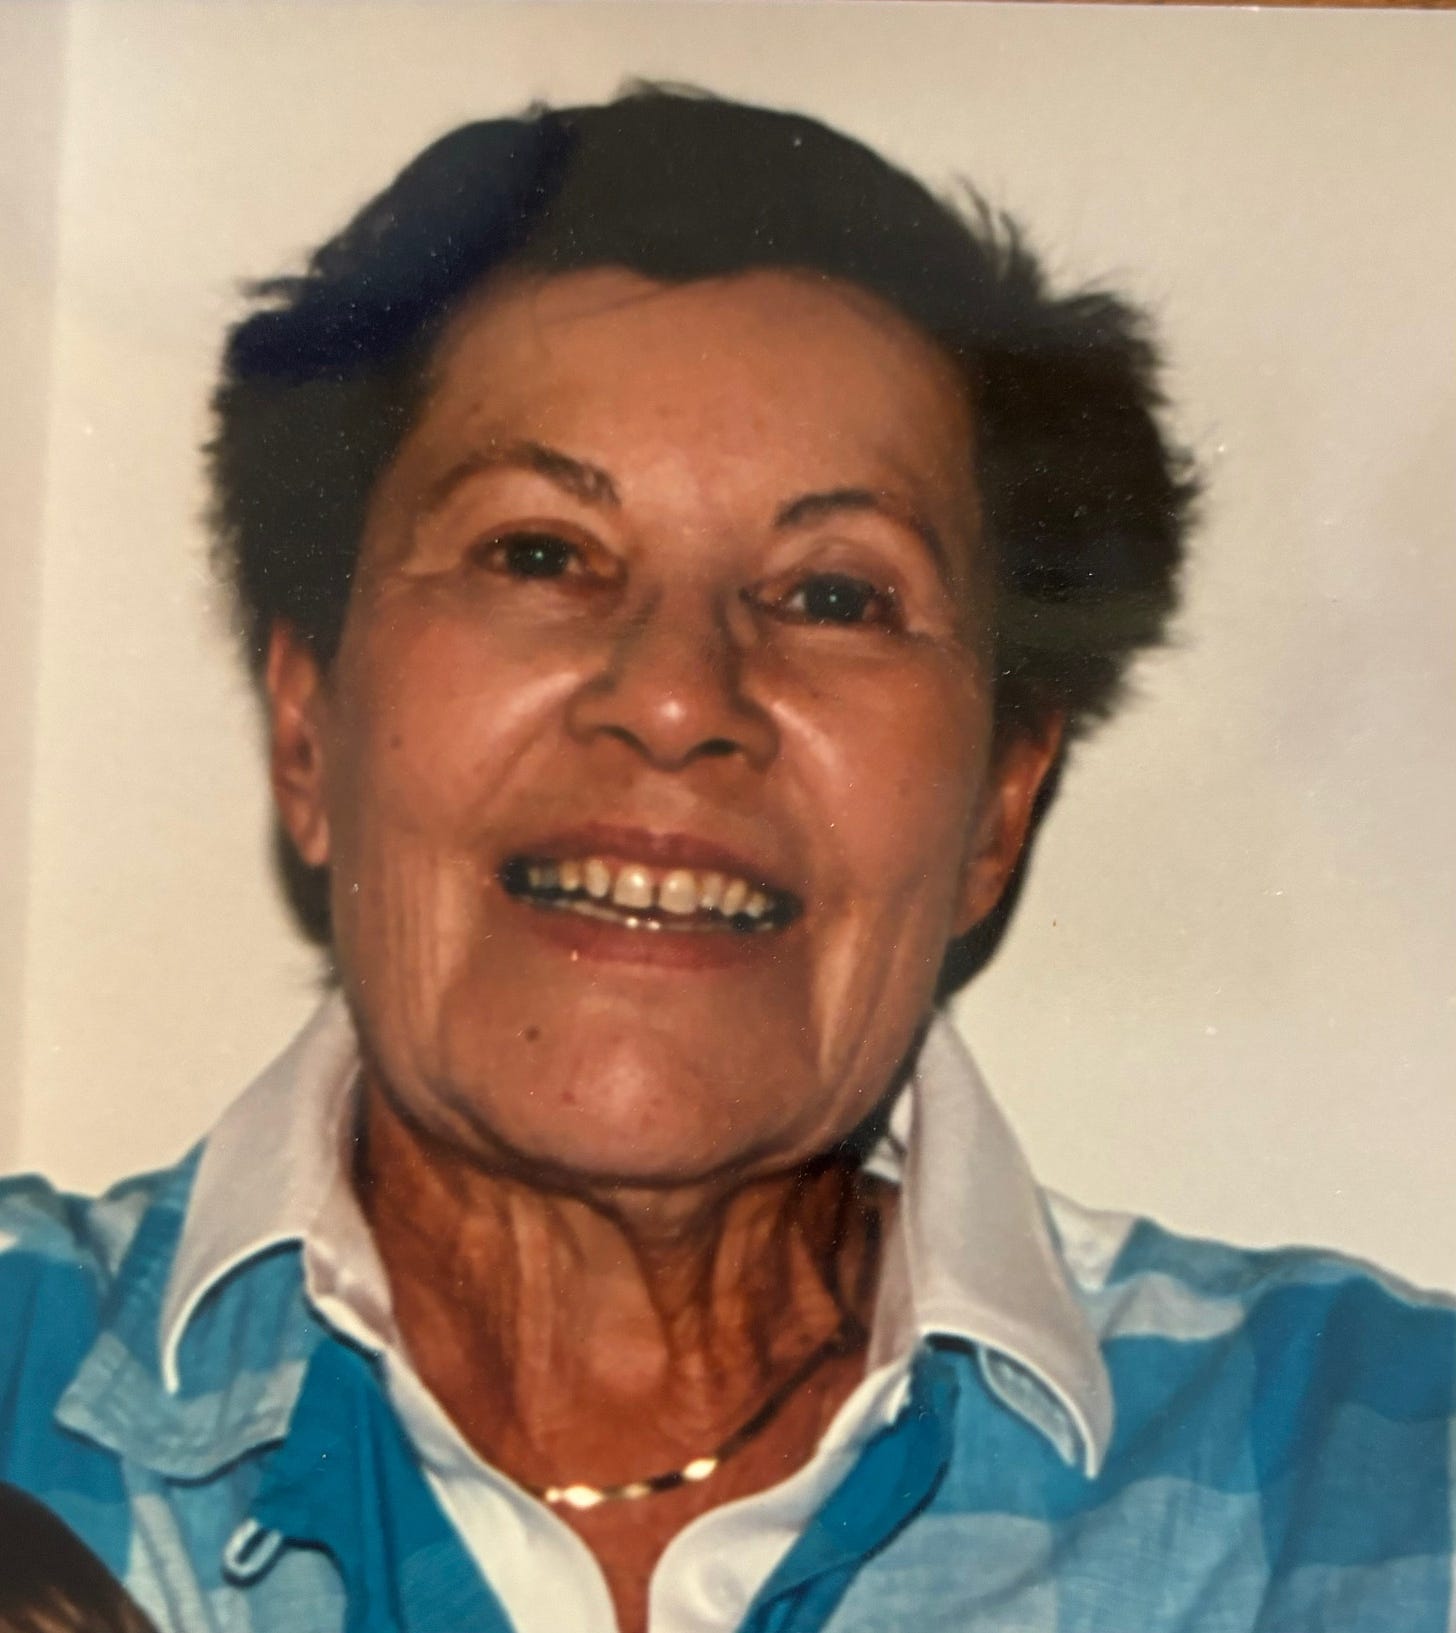 Photo of Etta Levy: She has short brown hair, and smiles at the camera